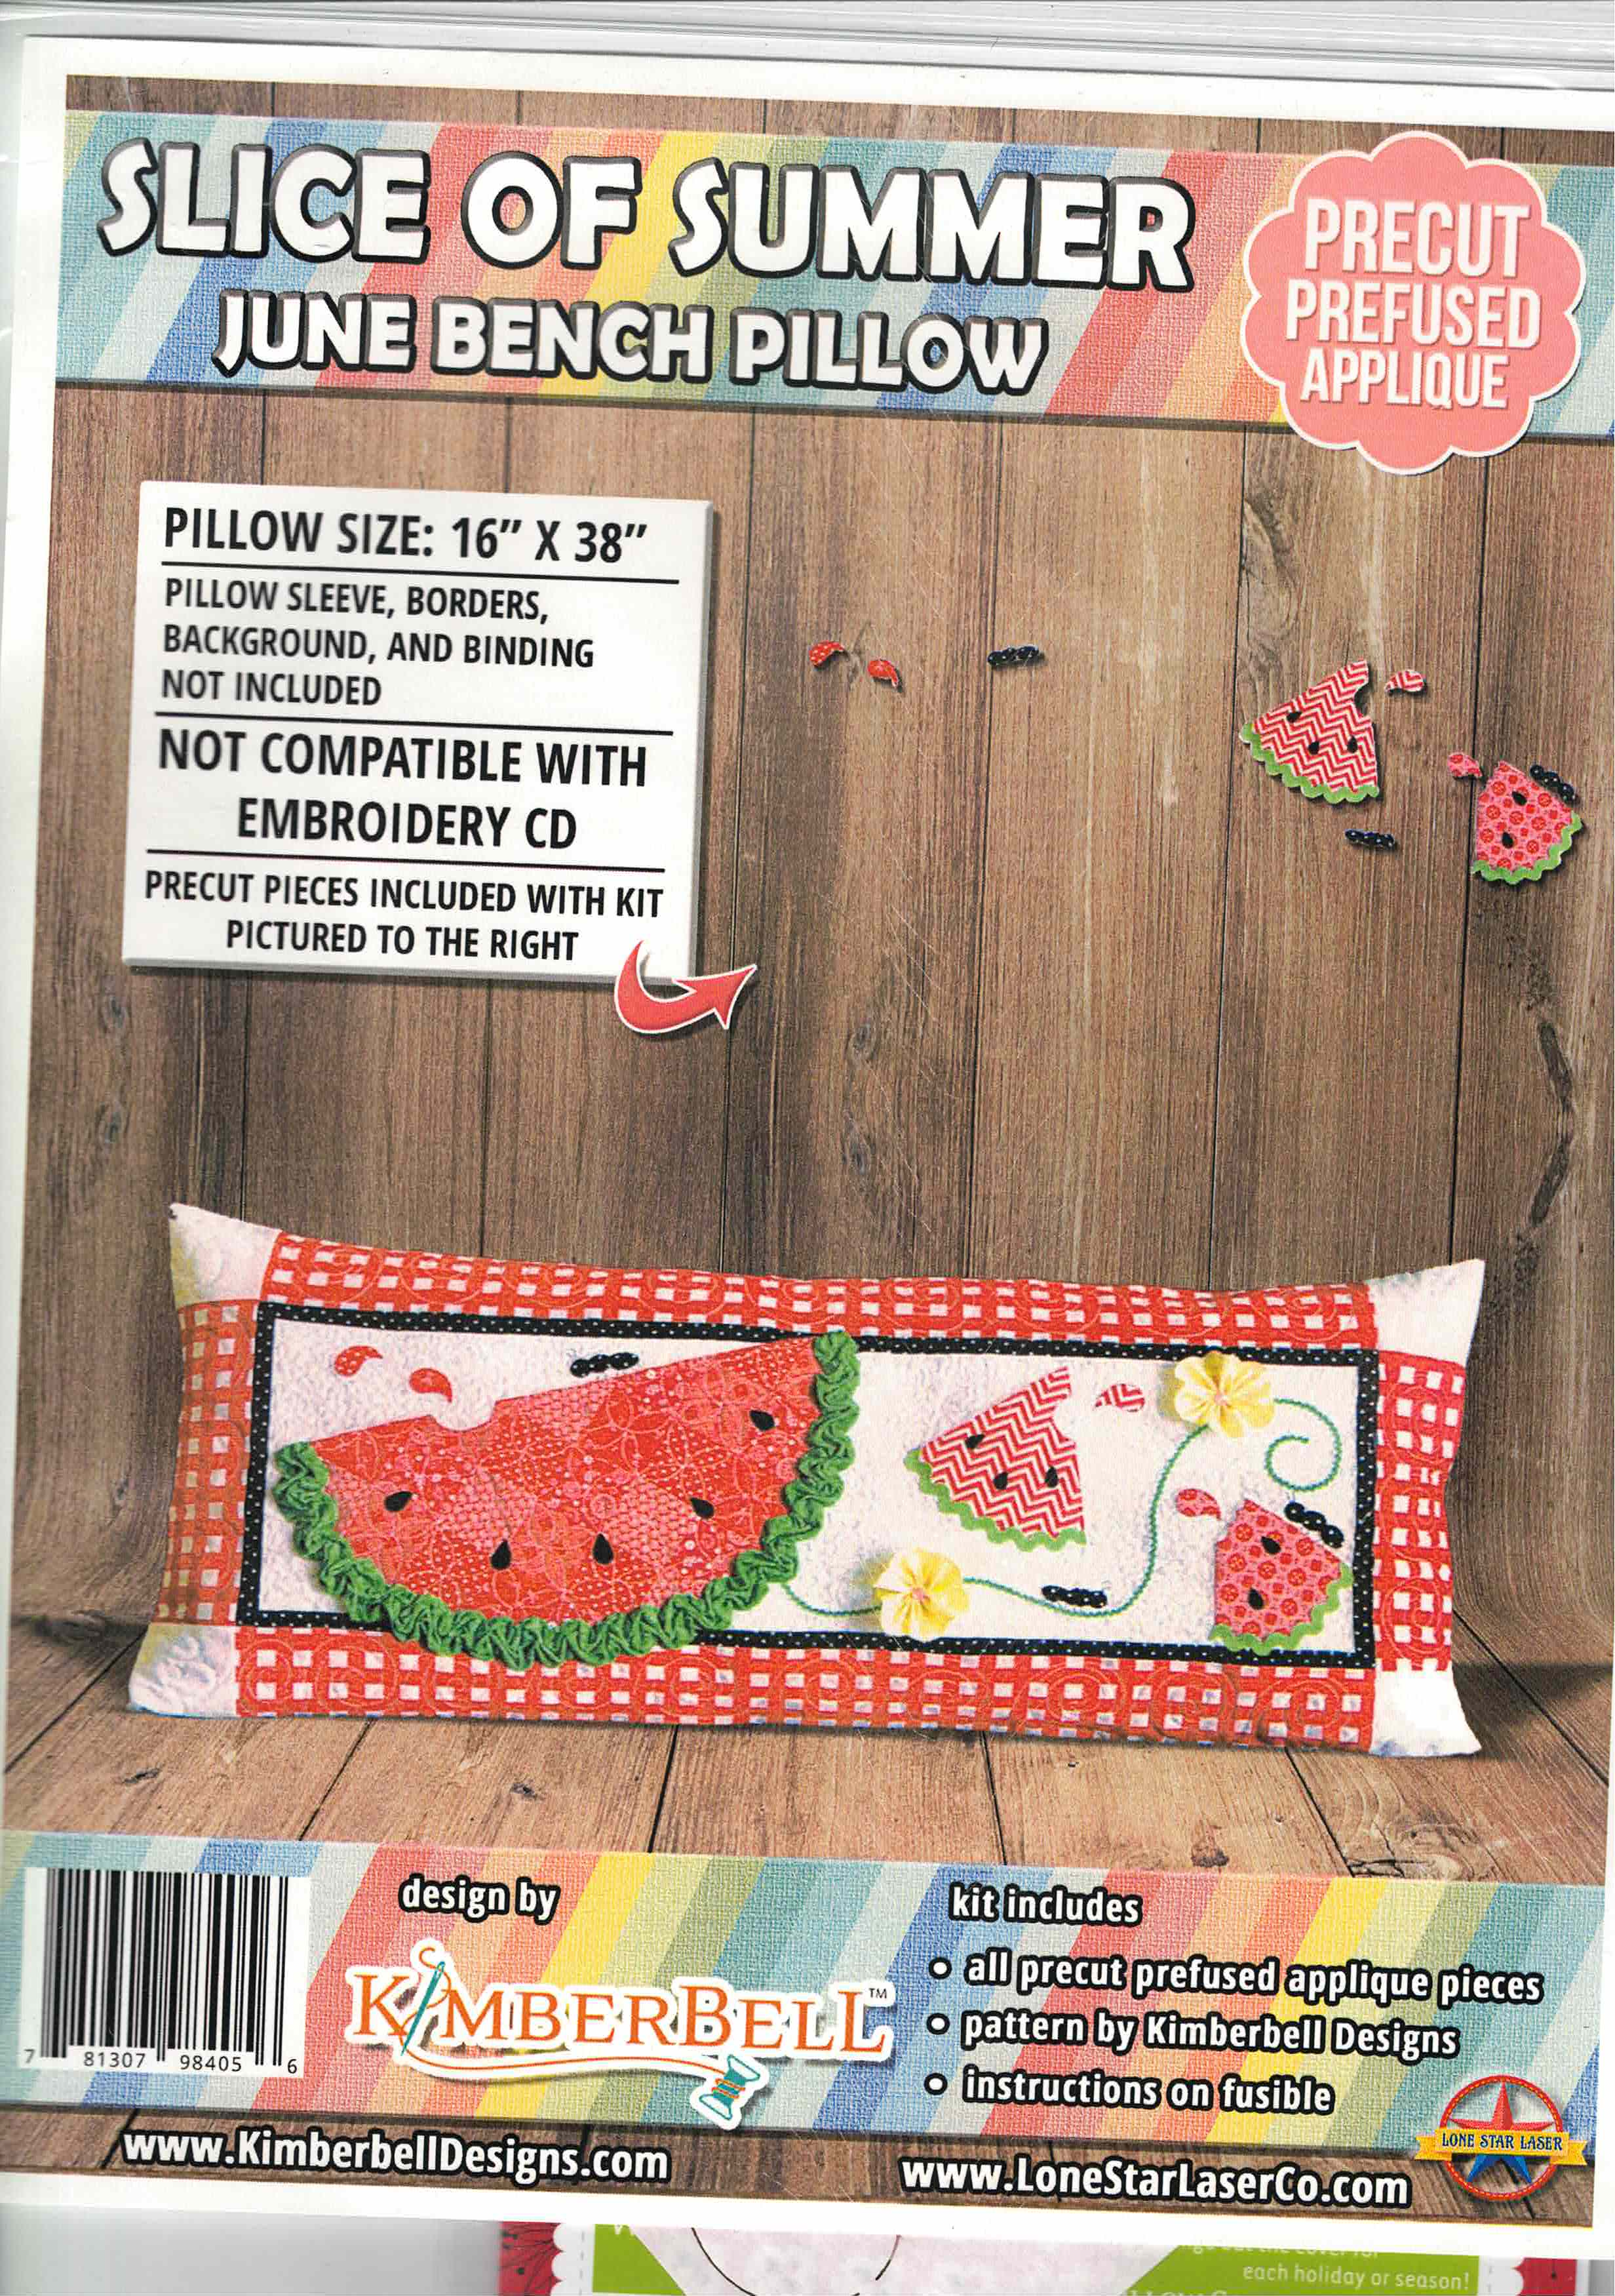 Slice of Summer - June Bench Pillow kit and pattern - KD175